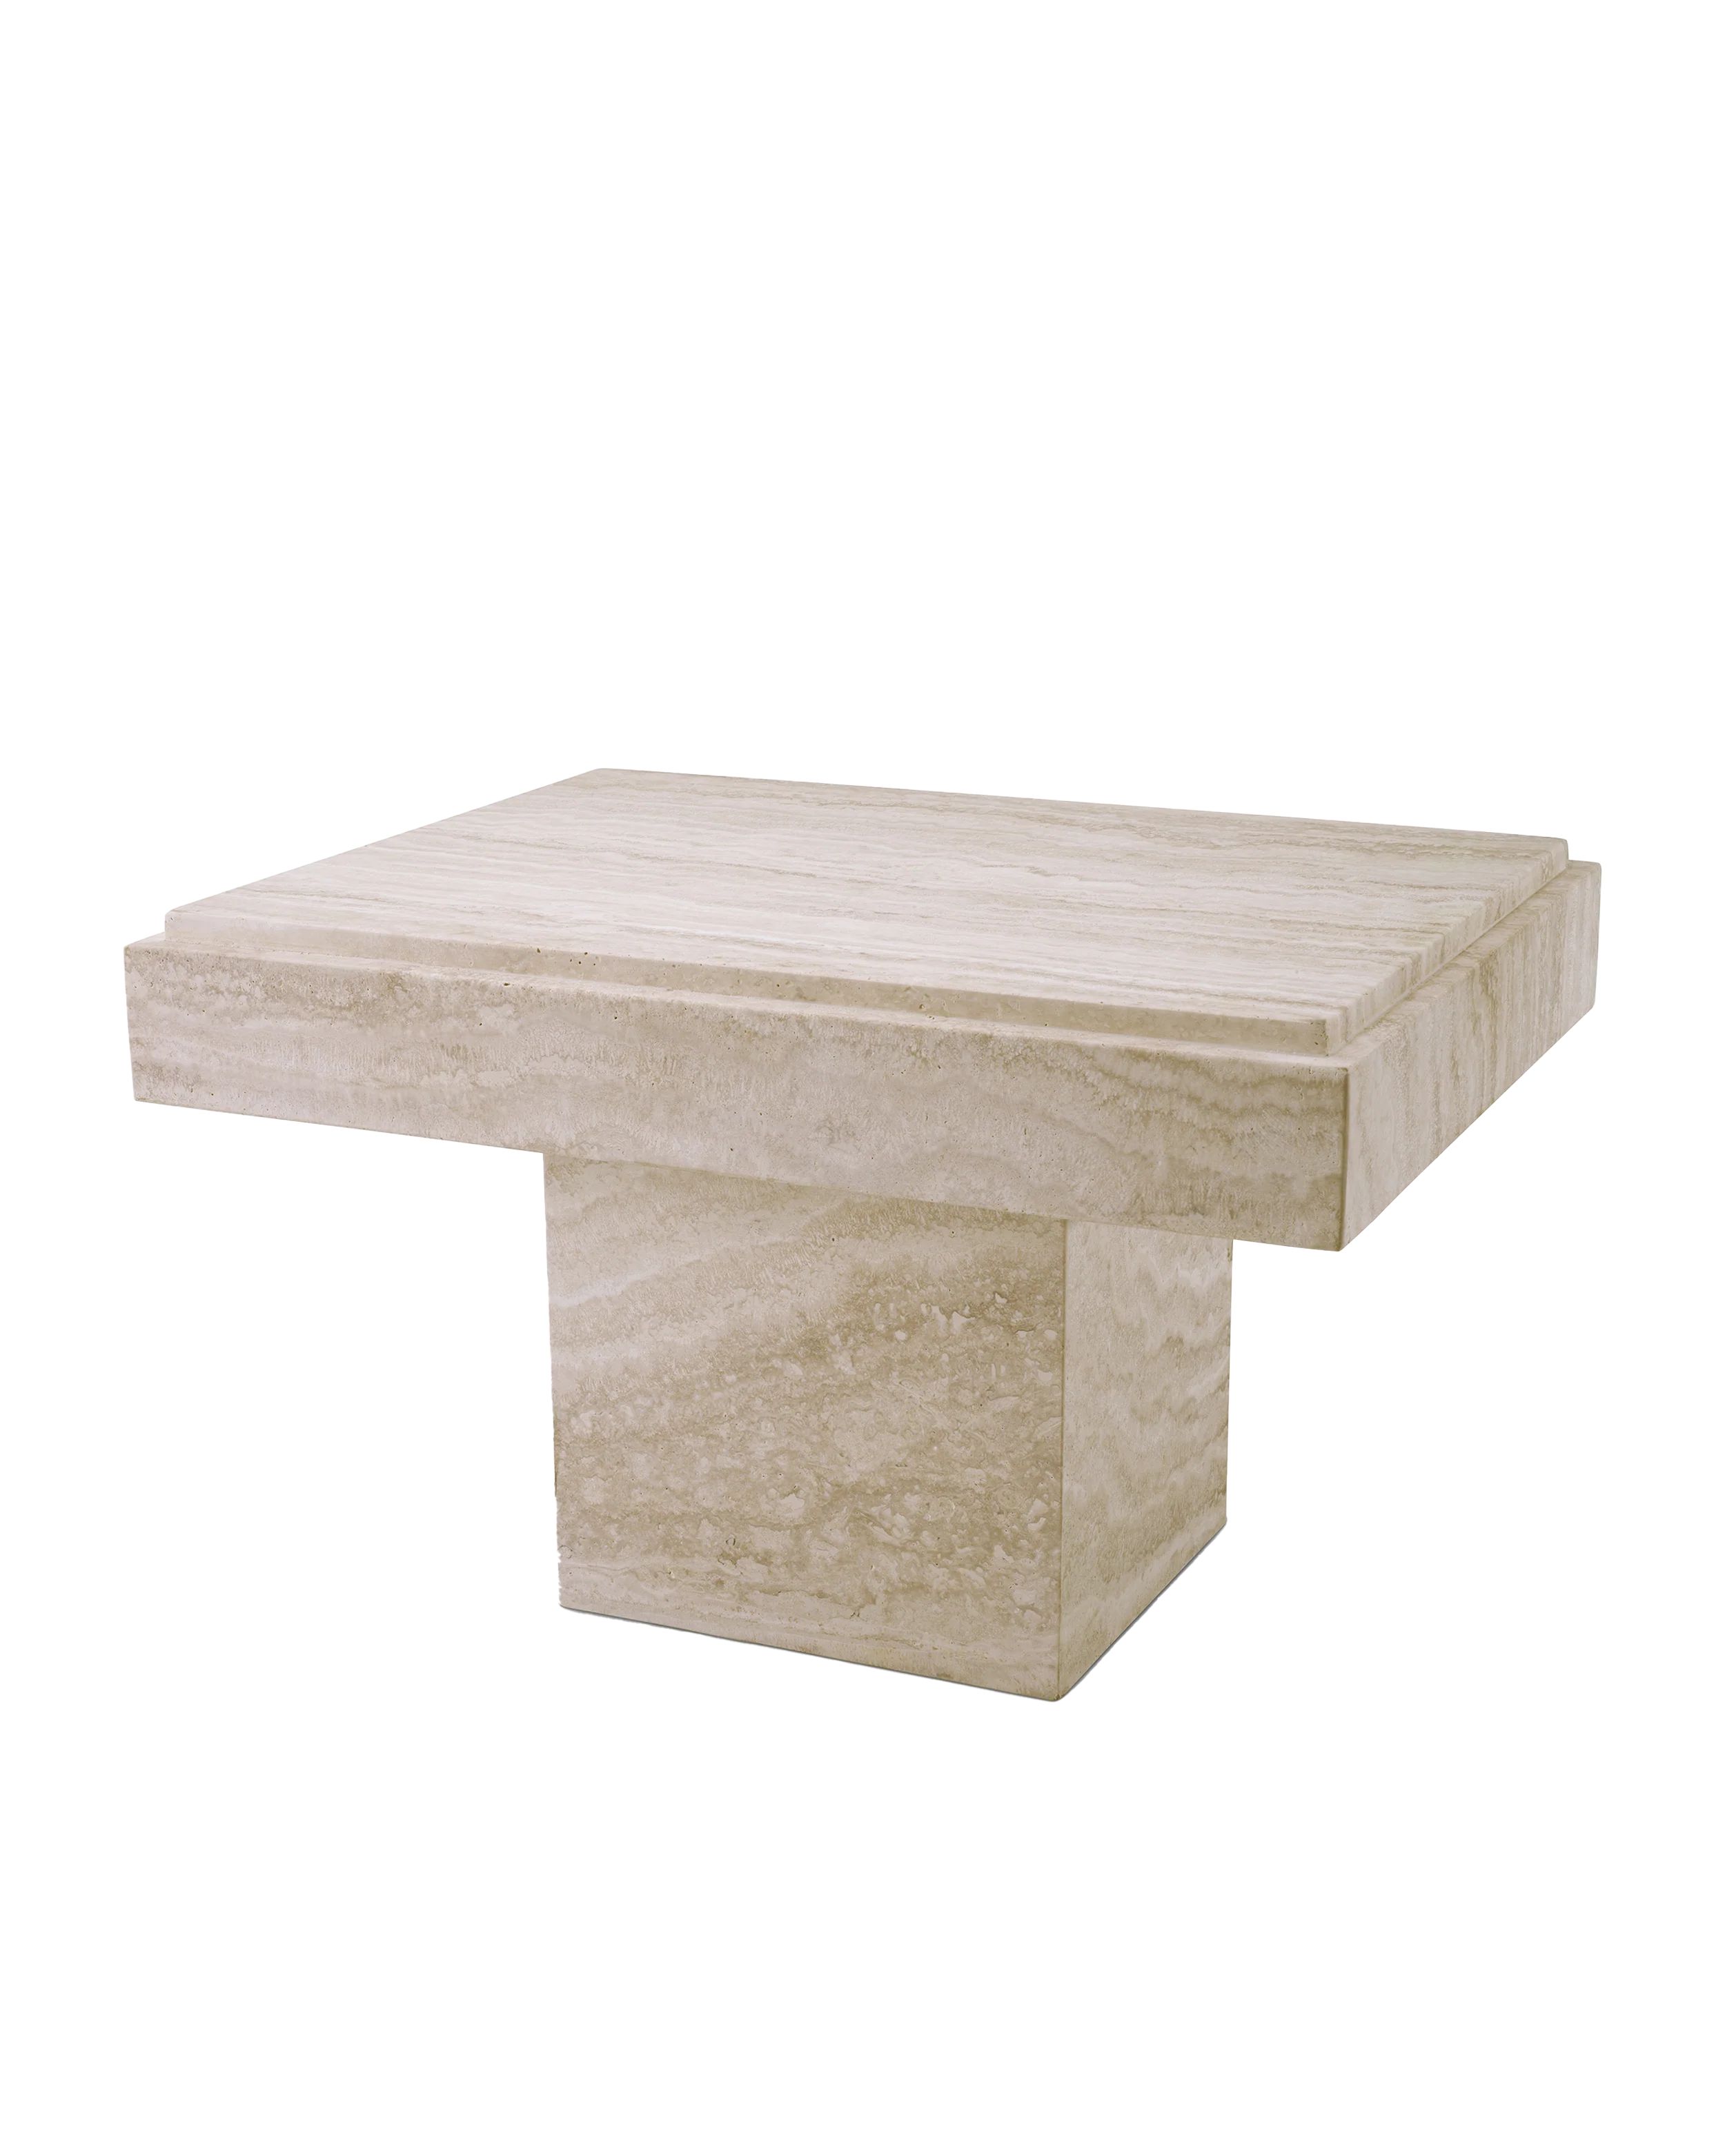 REFINED TRAVERTINE SIDE TABLE | Off-White Palette